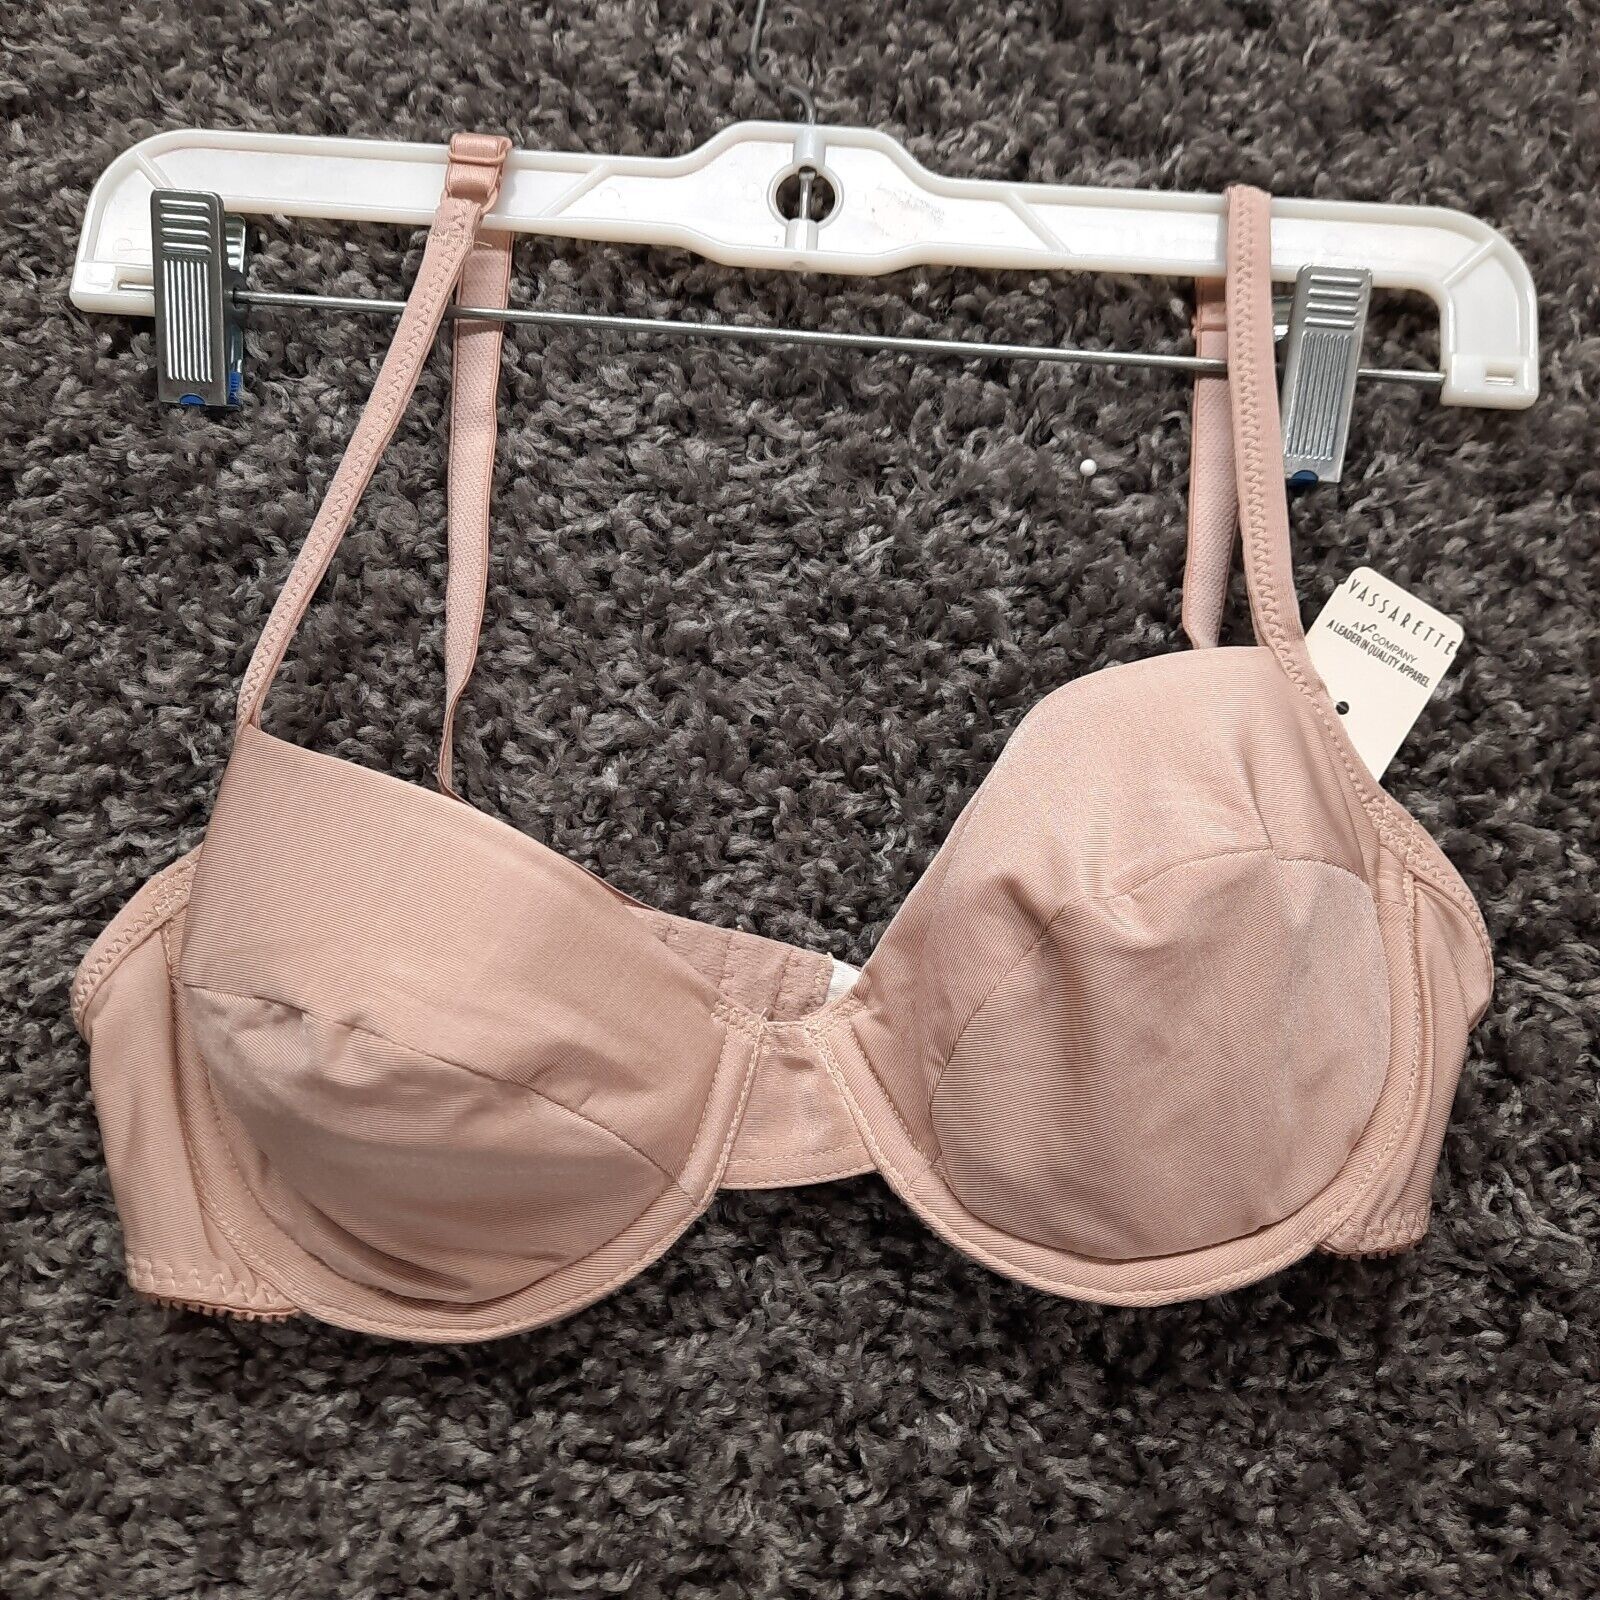 Maidenform Bra Size 40D Pink Full Figure Strapless Sweet Nothings